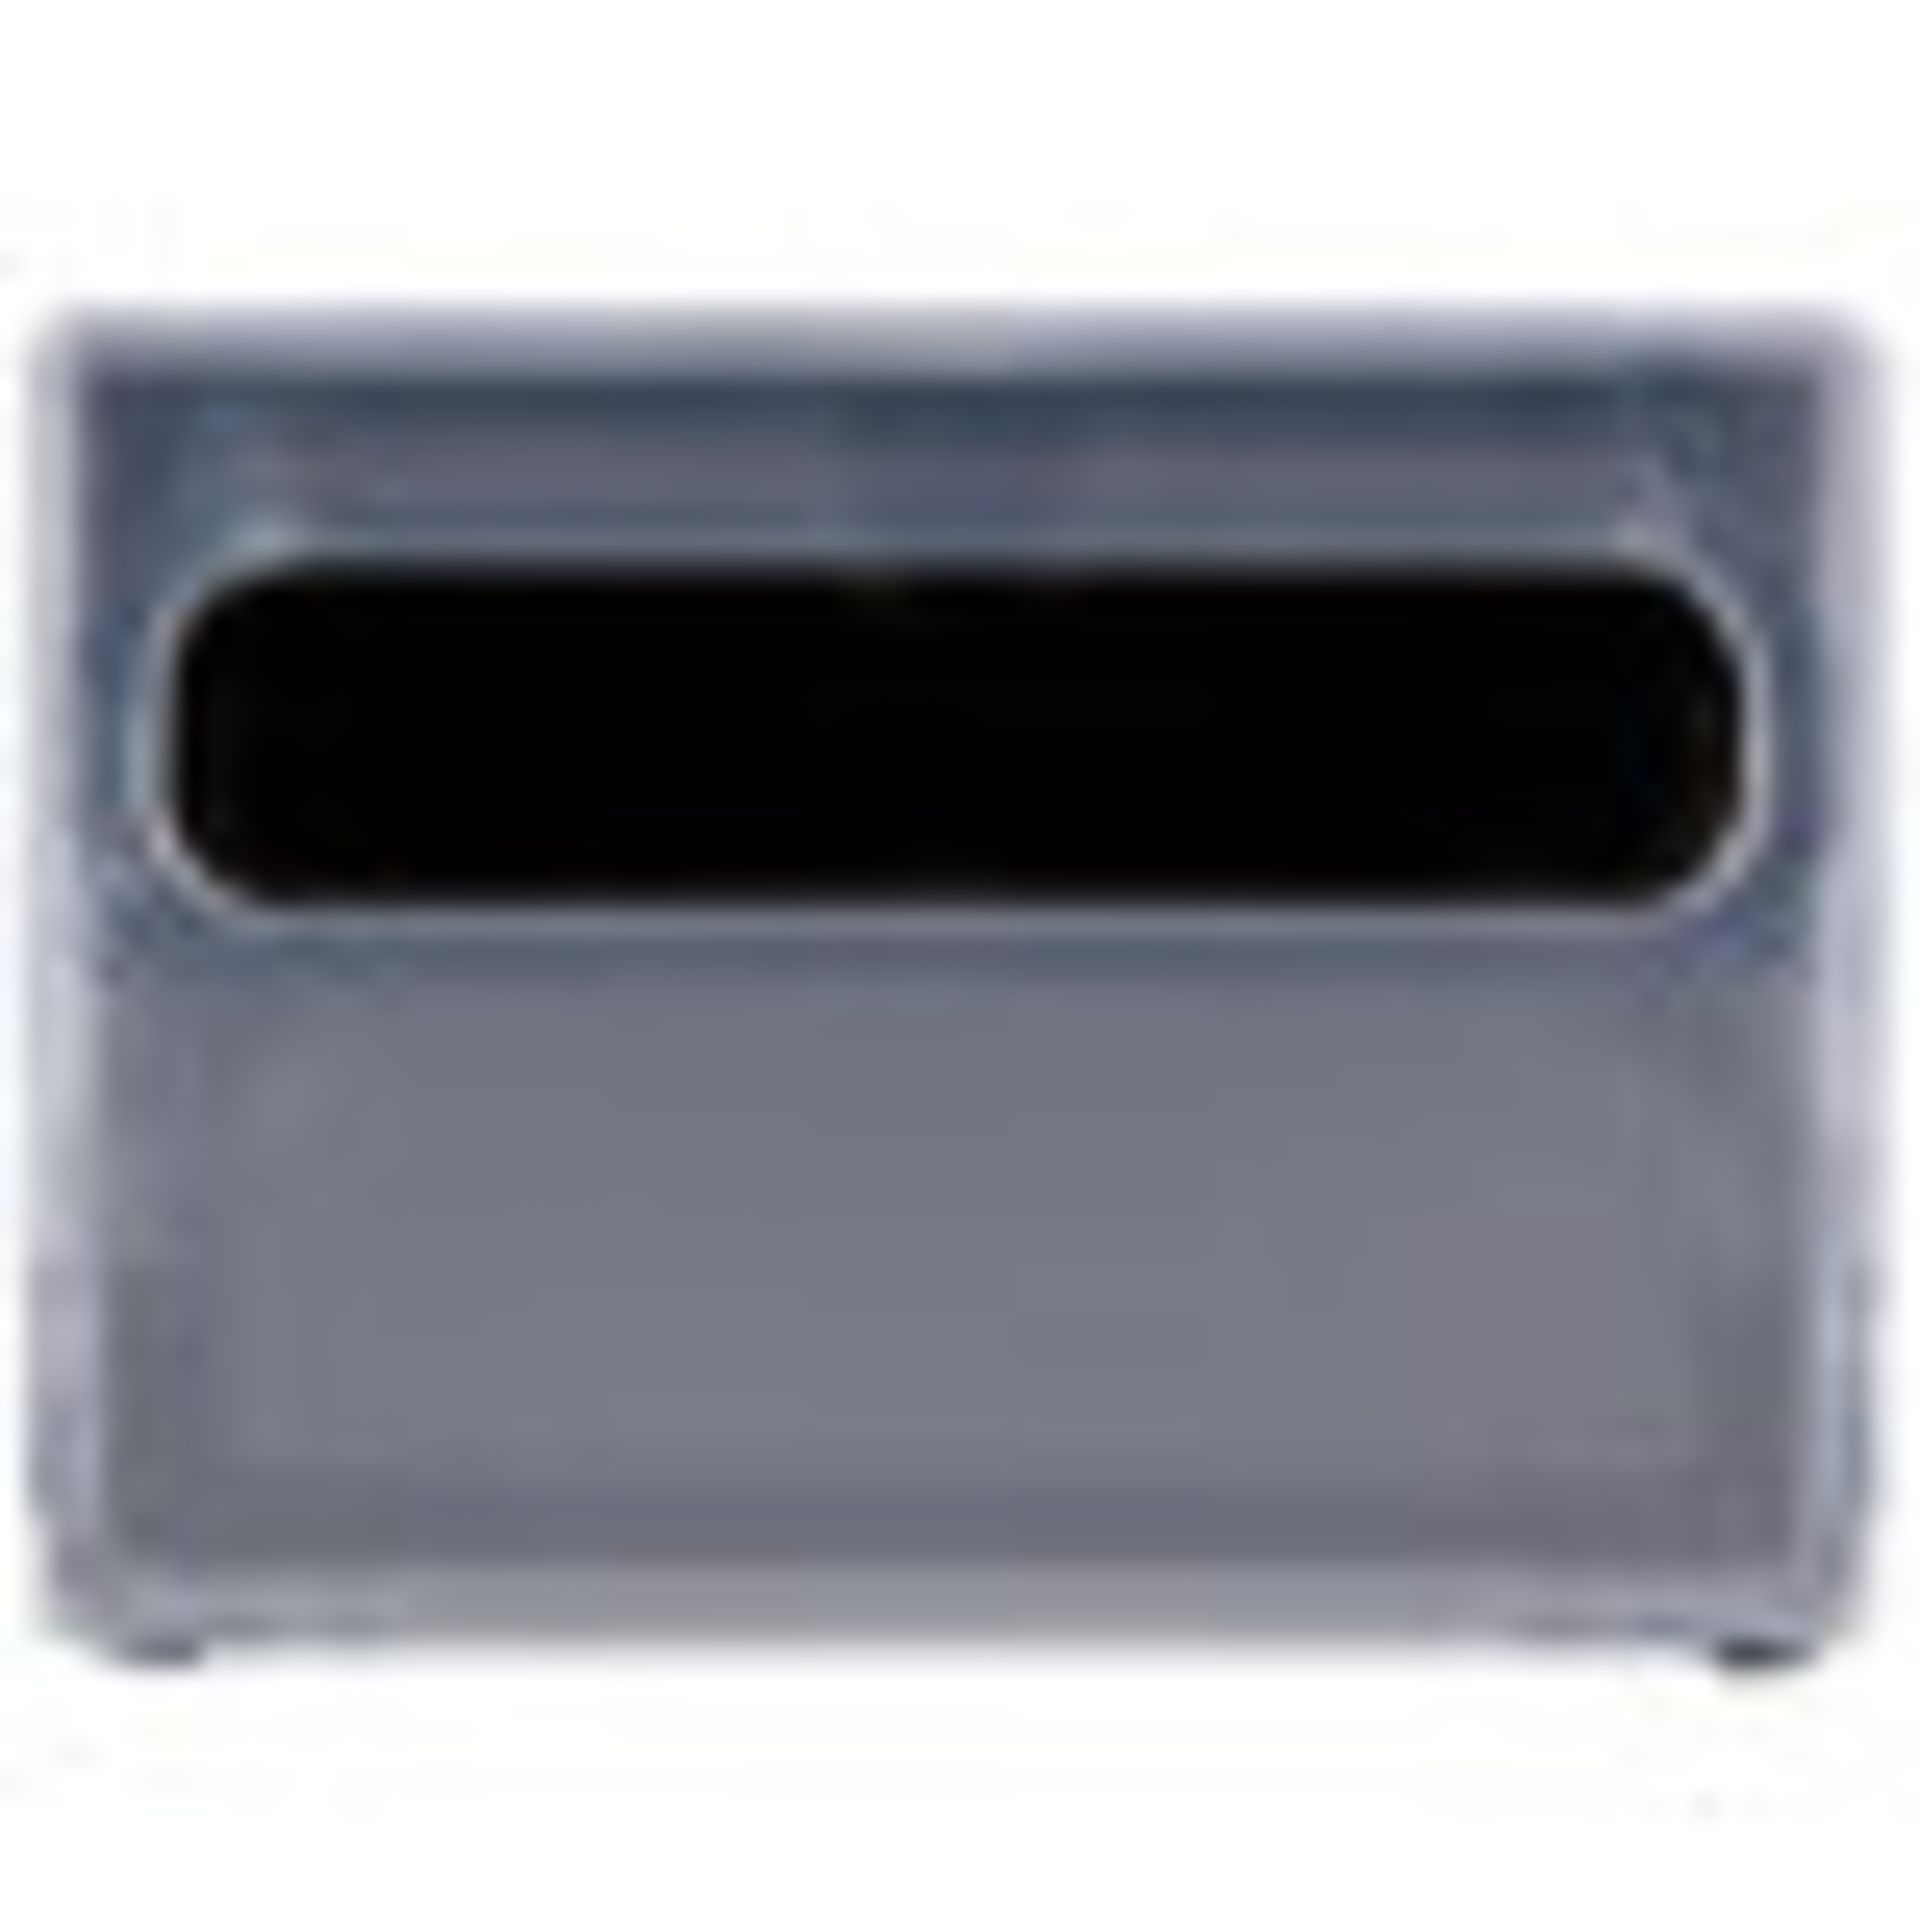 8 x Traex 7512-06 Black One Sided Countertop Fullfold Napkin Dispensers with Clear Faceplates - - Bild 6 aus 12